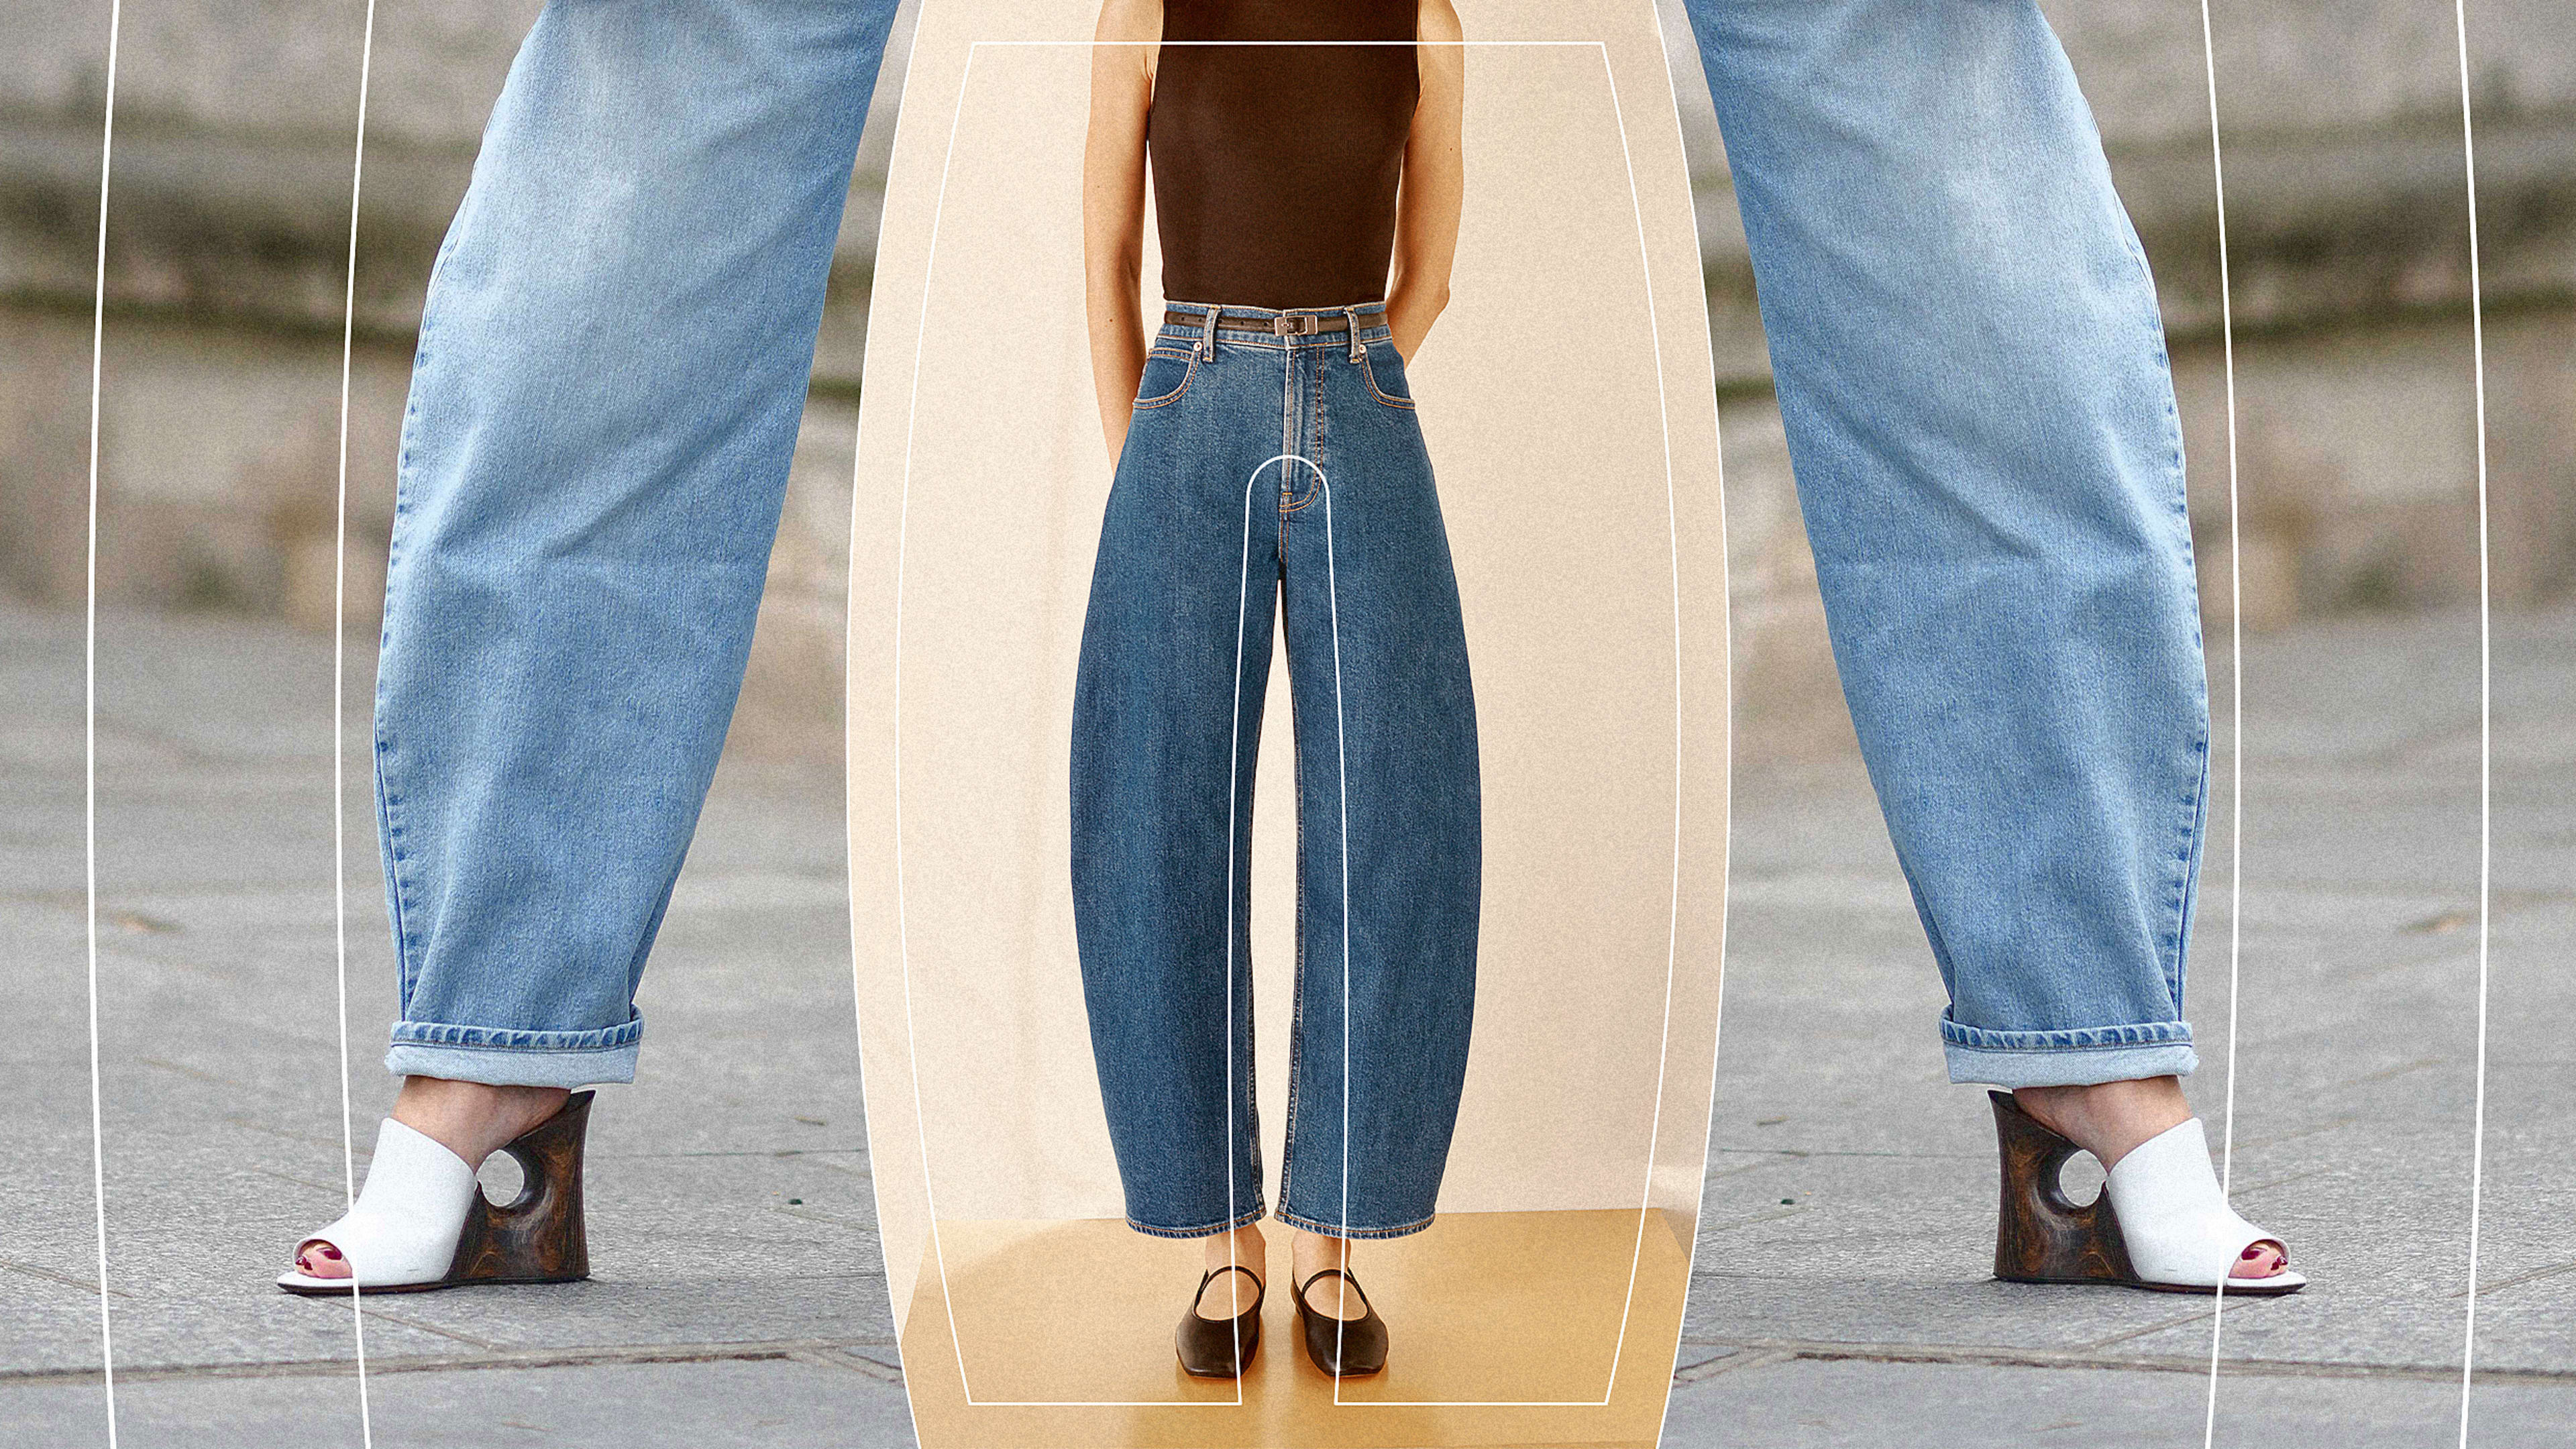 Why everyone is about to be wearing horseshoe jeans